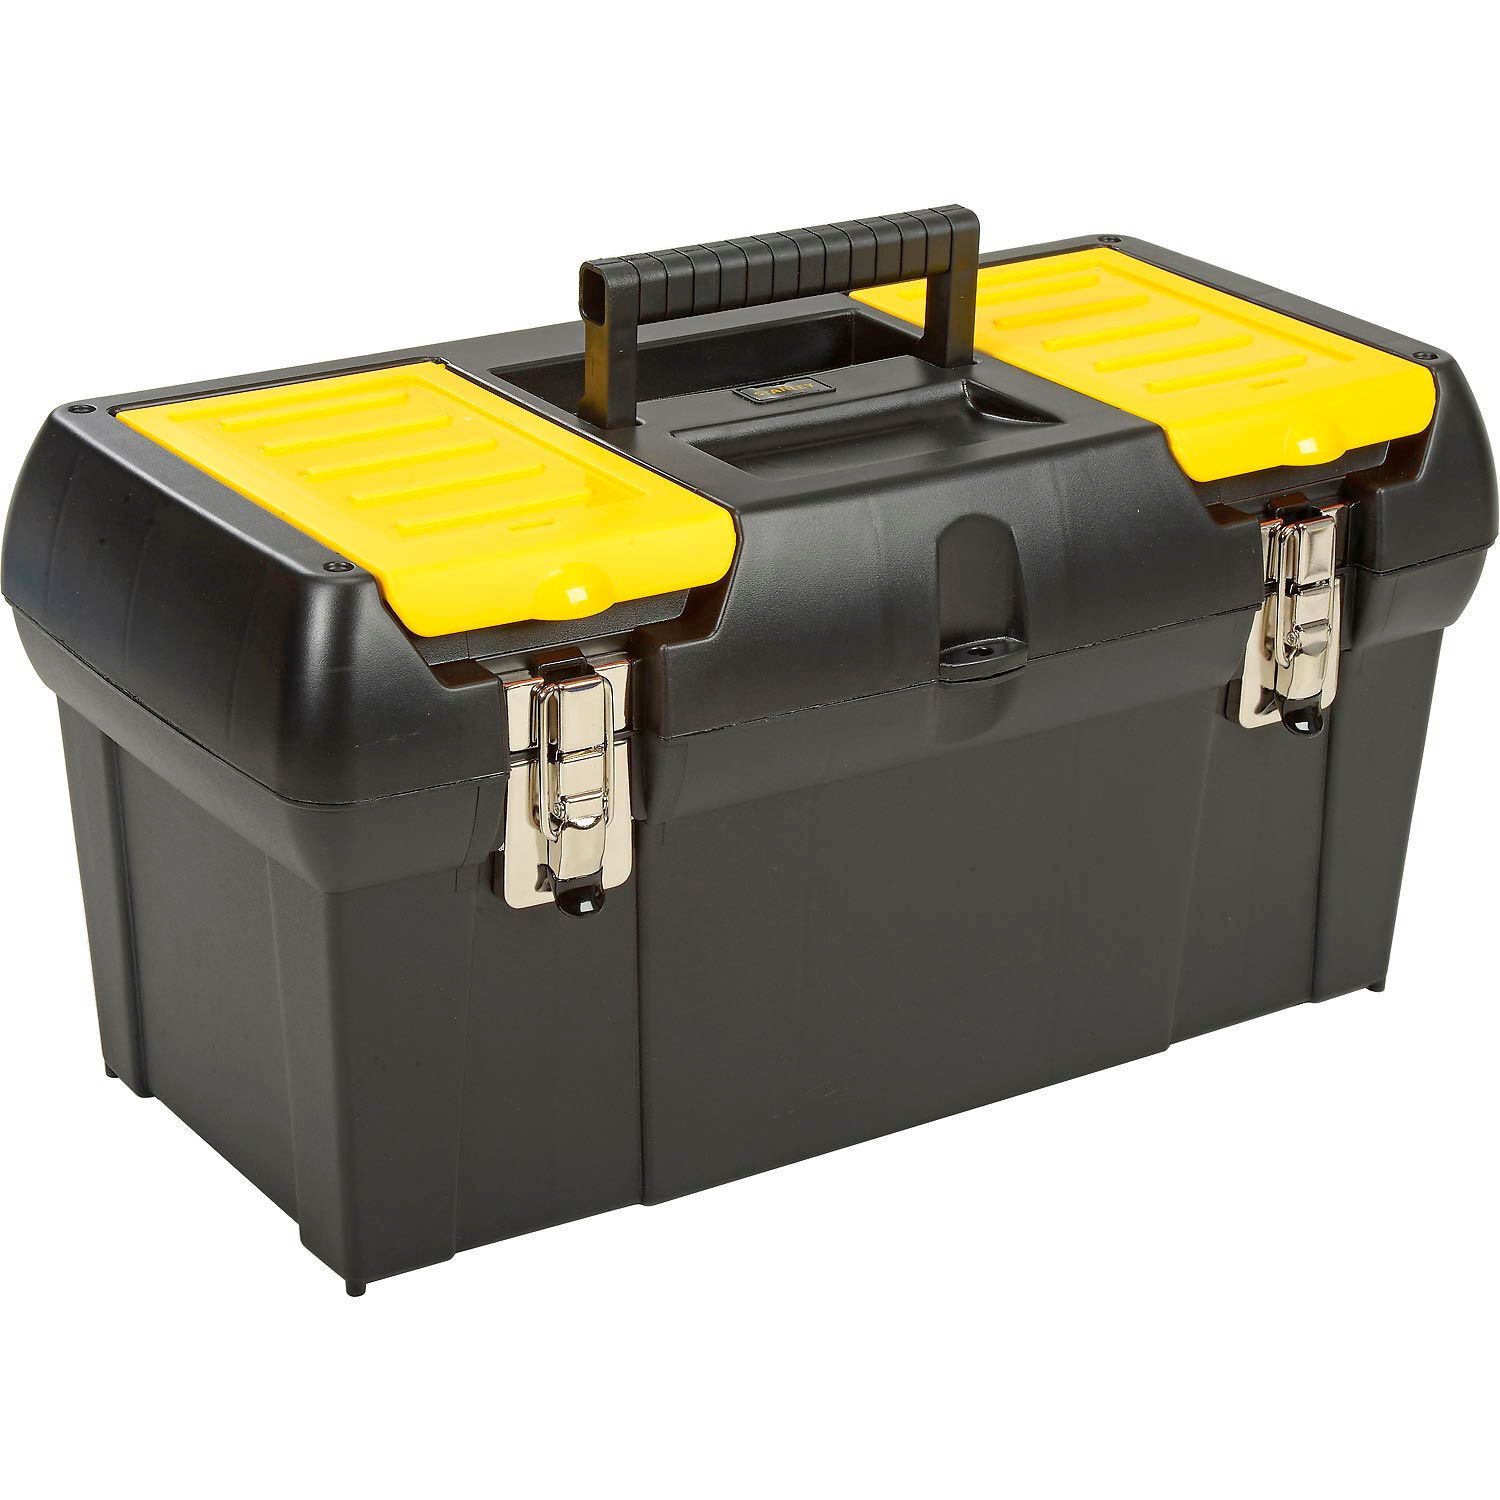 Stanley 019151M Stanley 19" Series 2000 Tool Box With 2/3 Tray - $47.99